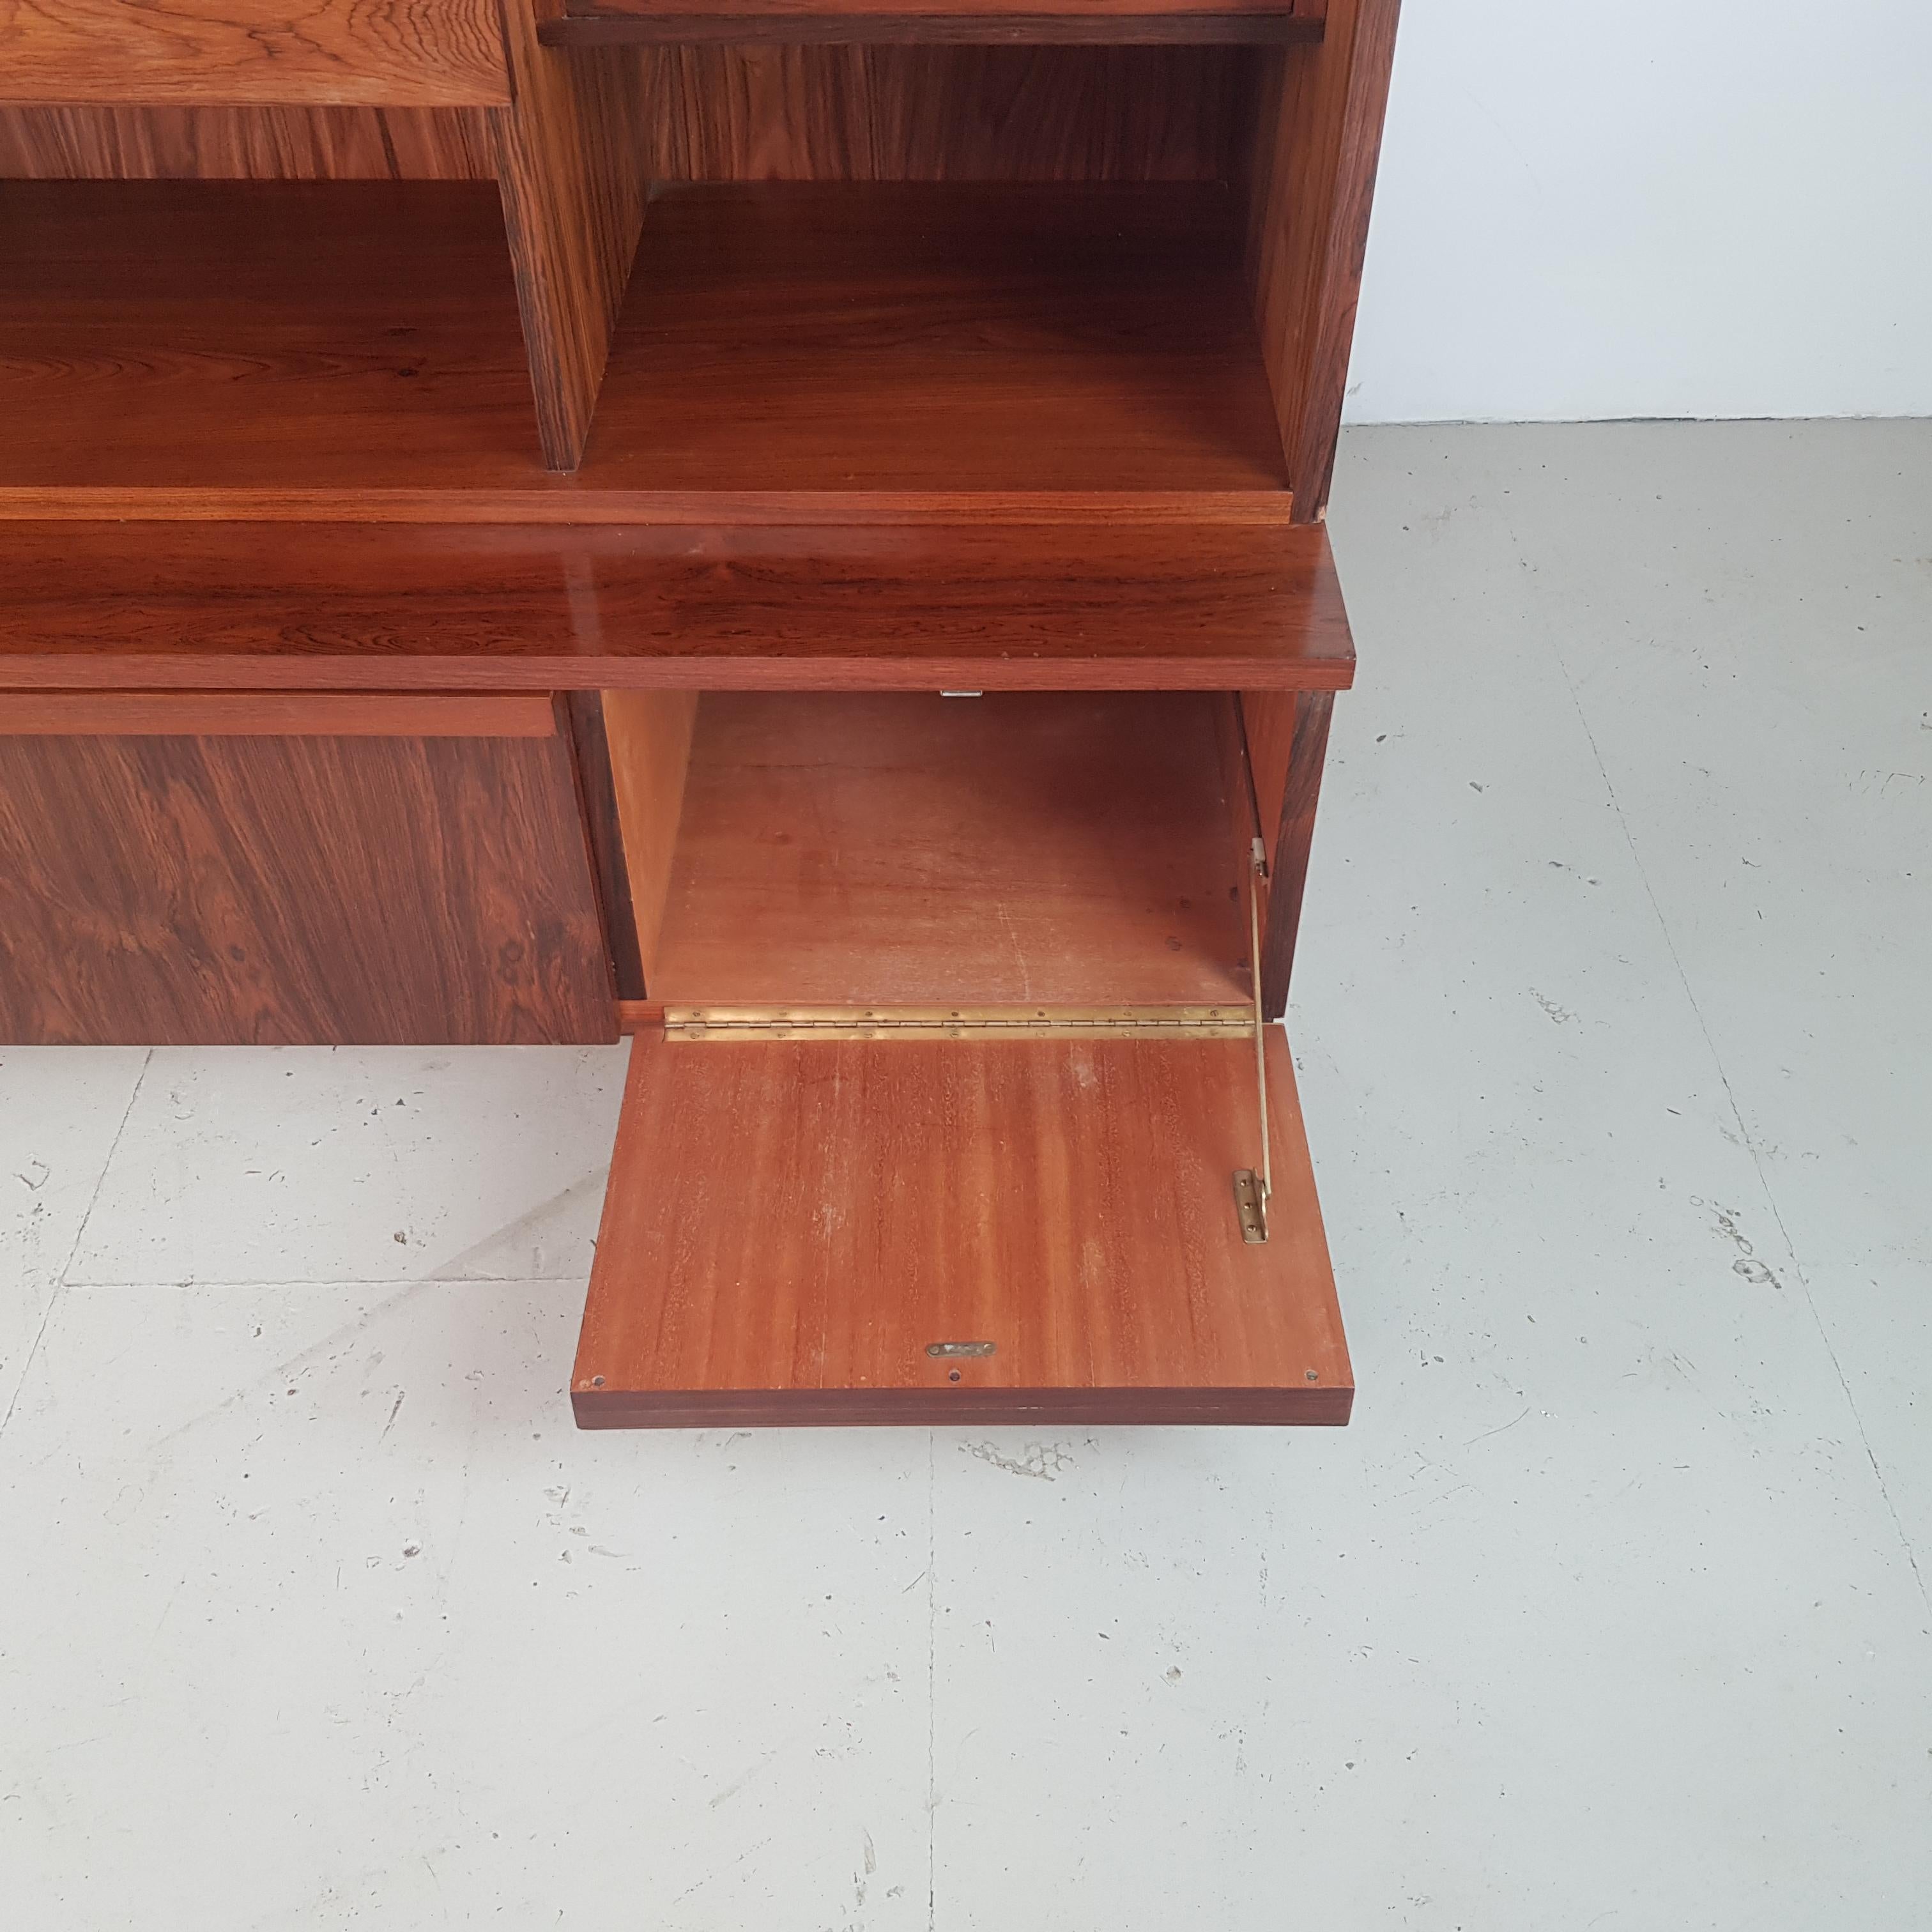 Vintage 1960s Rosewood Wall Unit by Robert Heritage for Archie Shine In Good Condition For Sale In Lewes, East Sussex